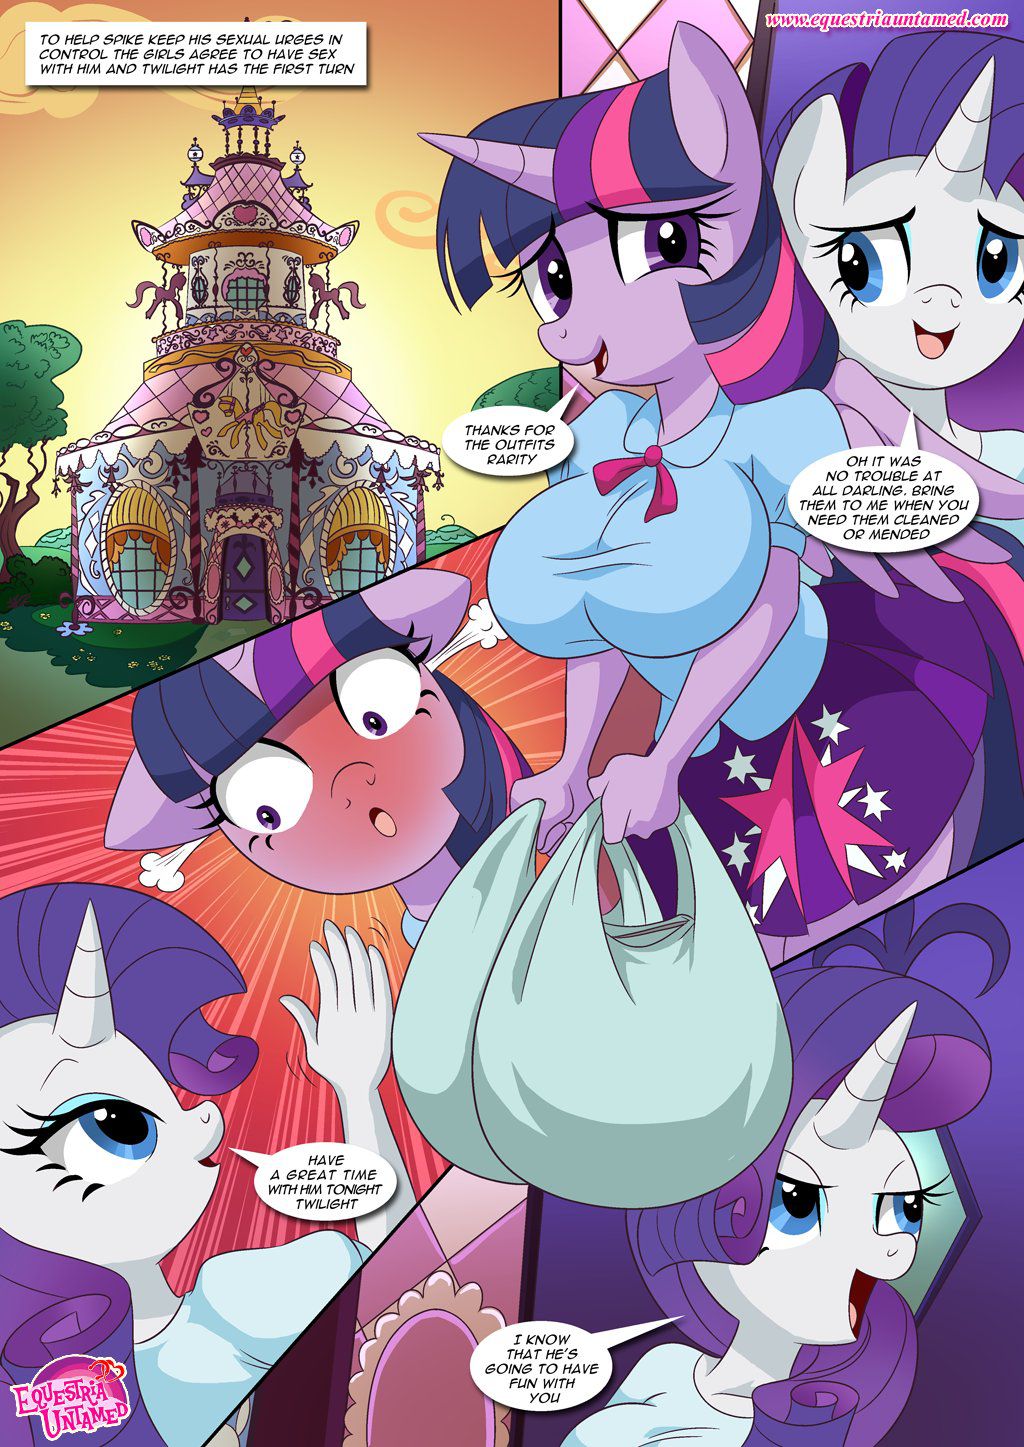 [Palcomix] Sex Ed with Miss Twilight Sparkle (My Little Pony Friendship Is Magic) [Ongoing] 2